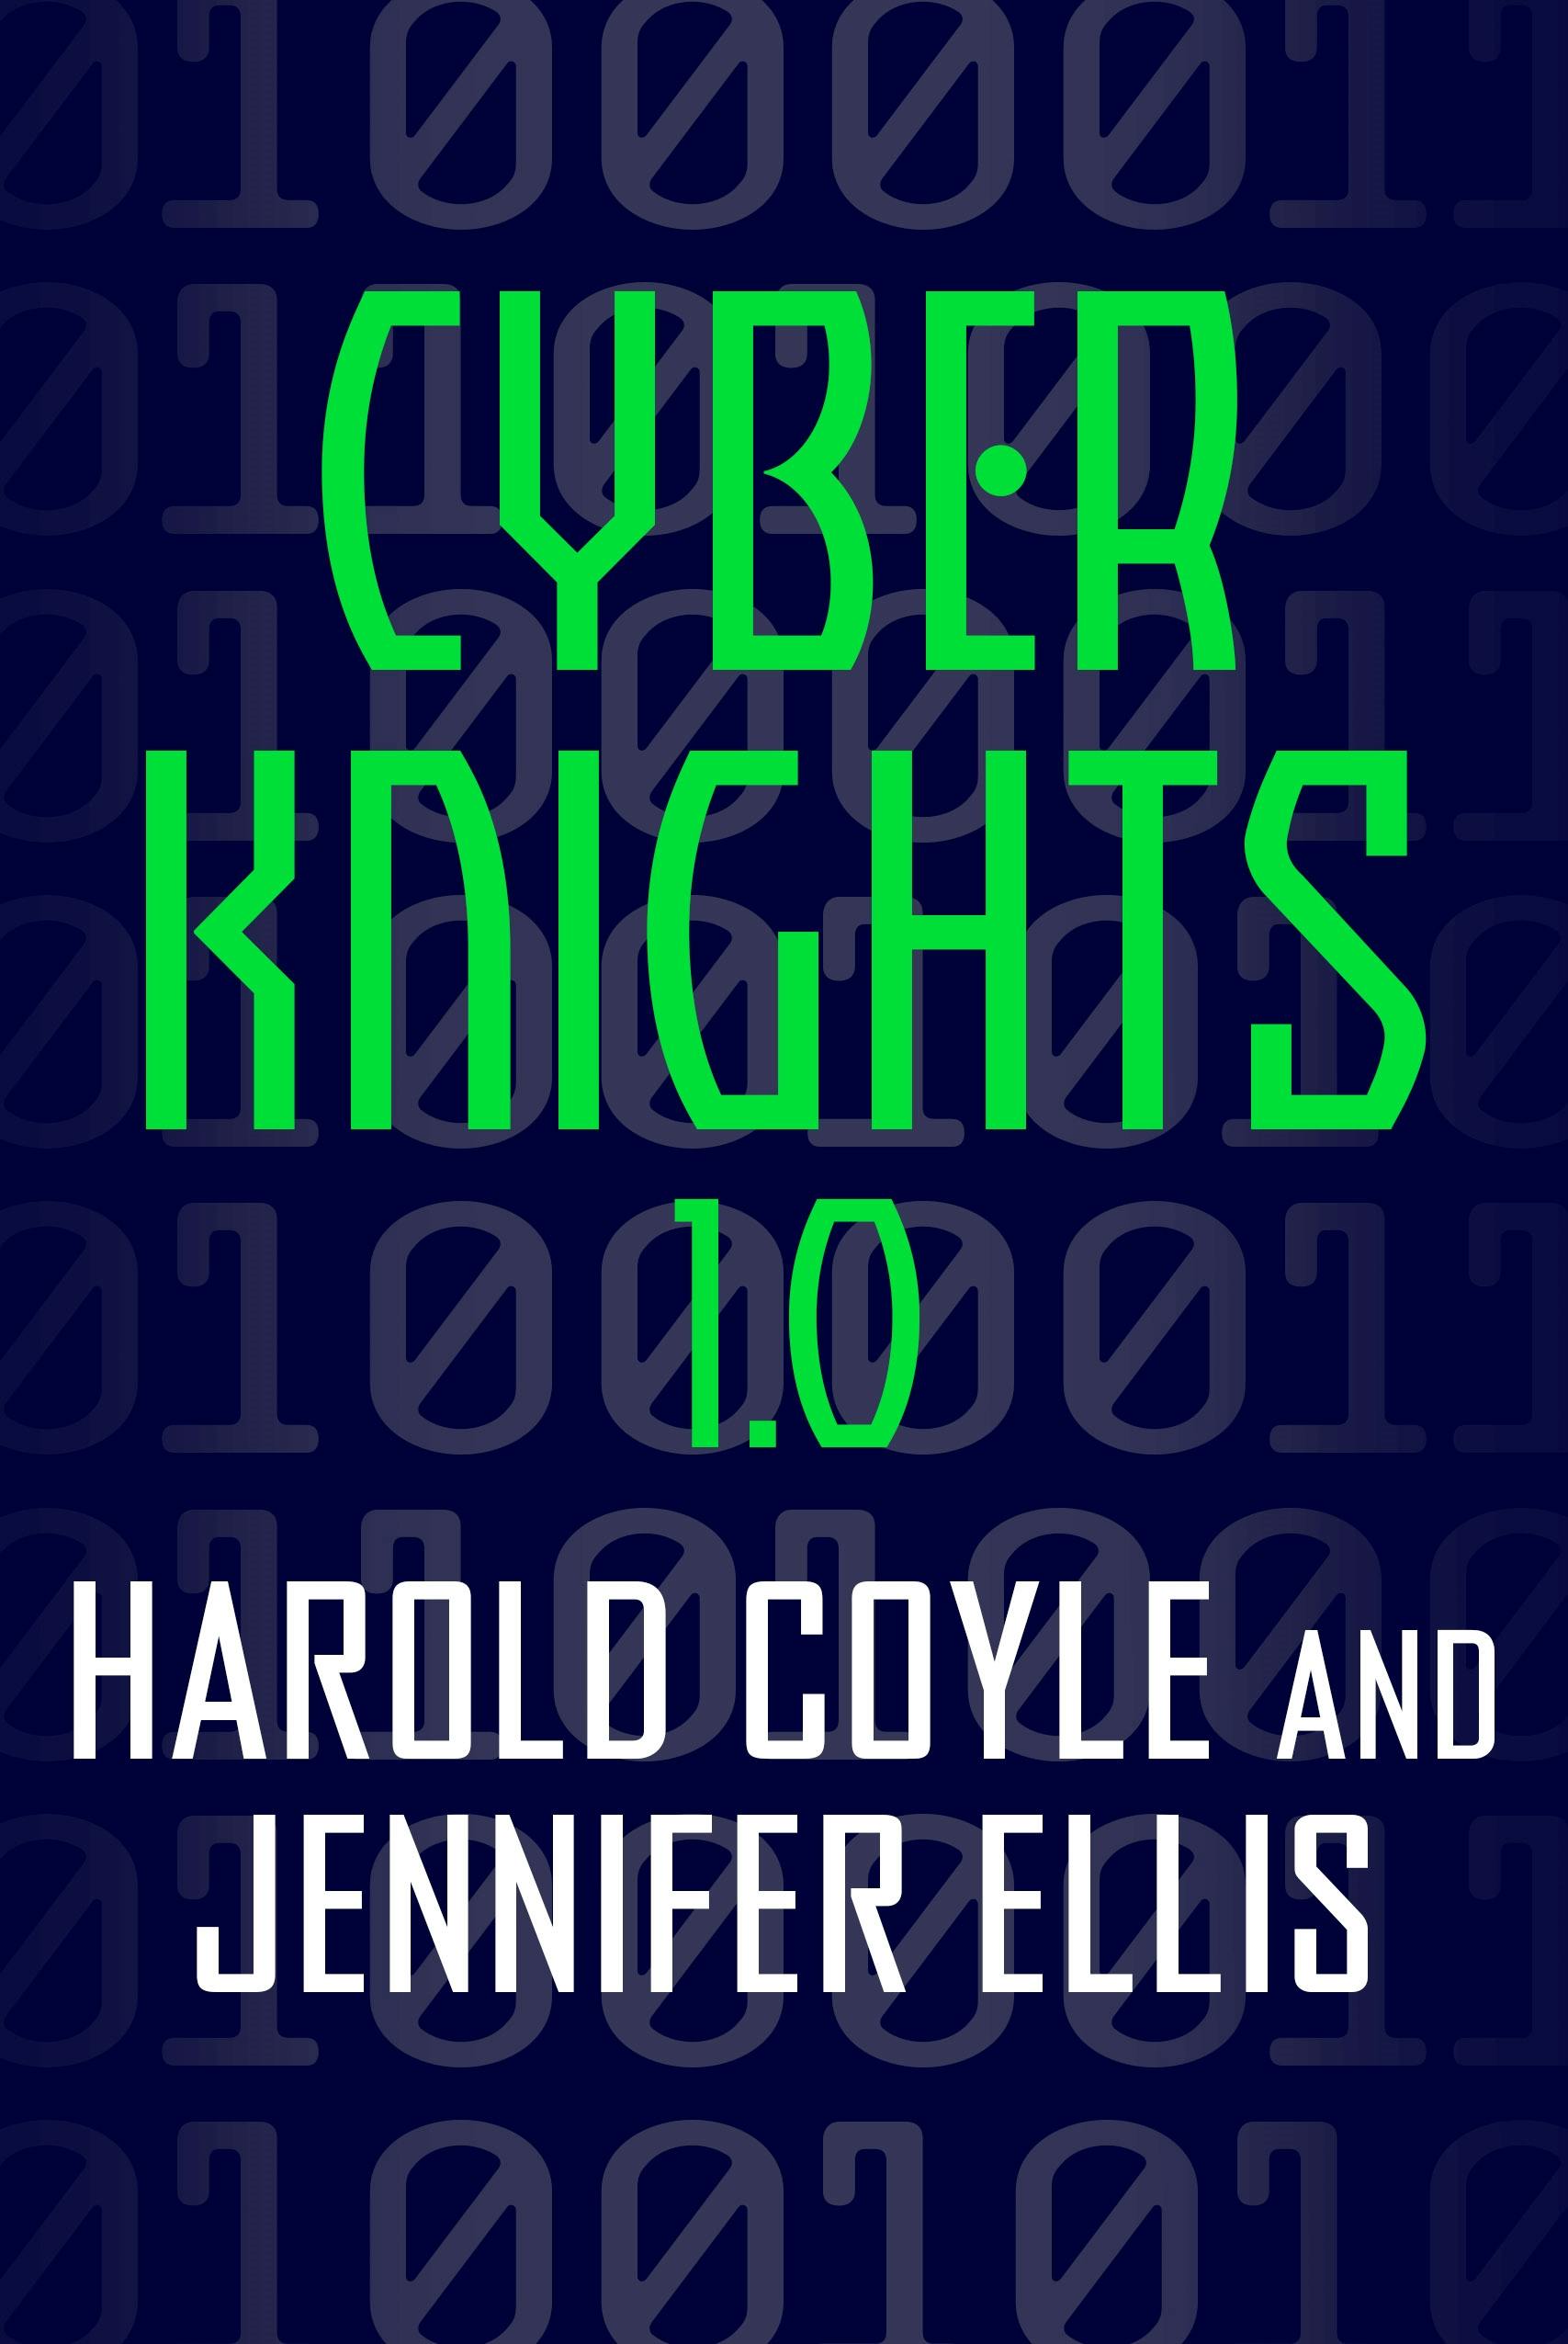 Cover for the book titled as: Cyber Knights 1.0